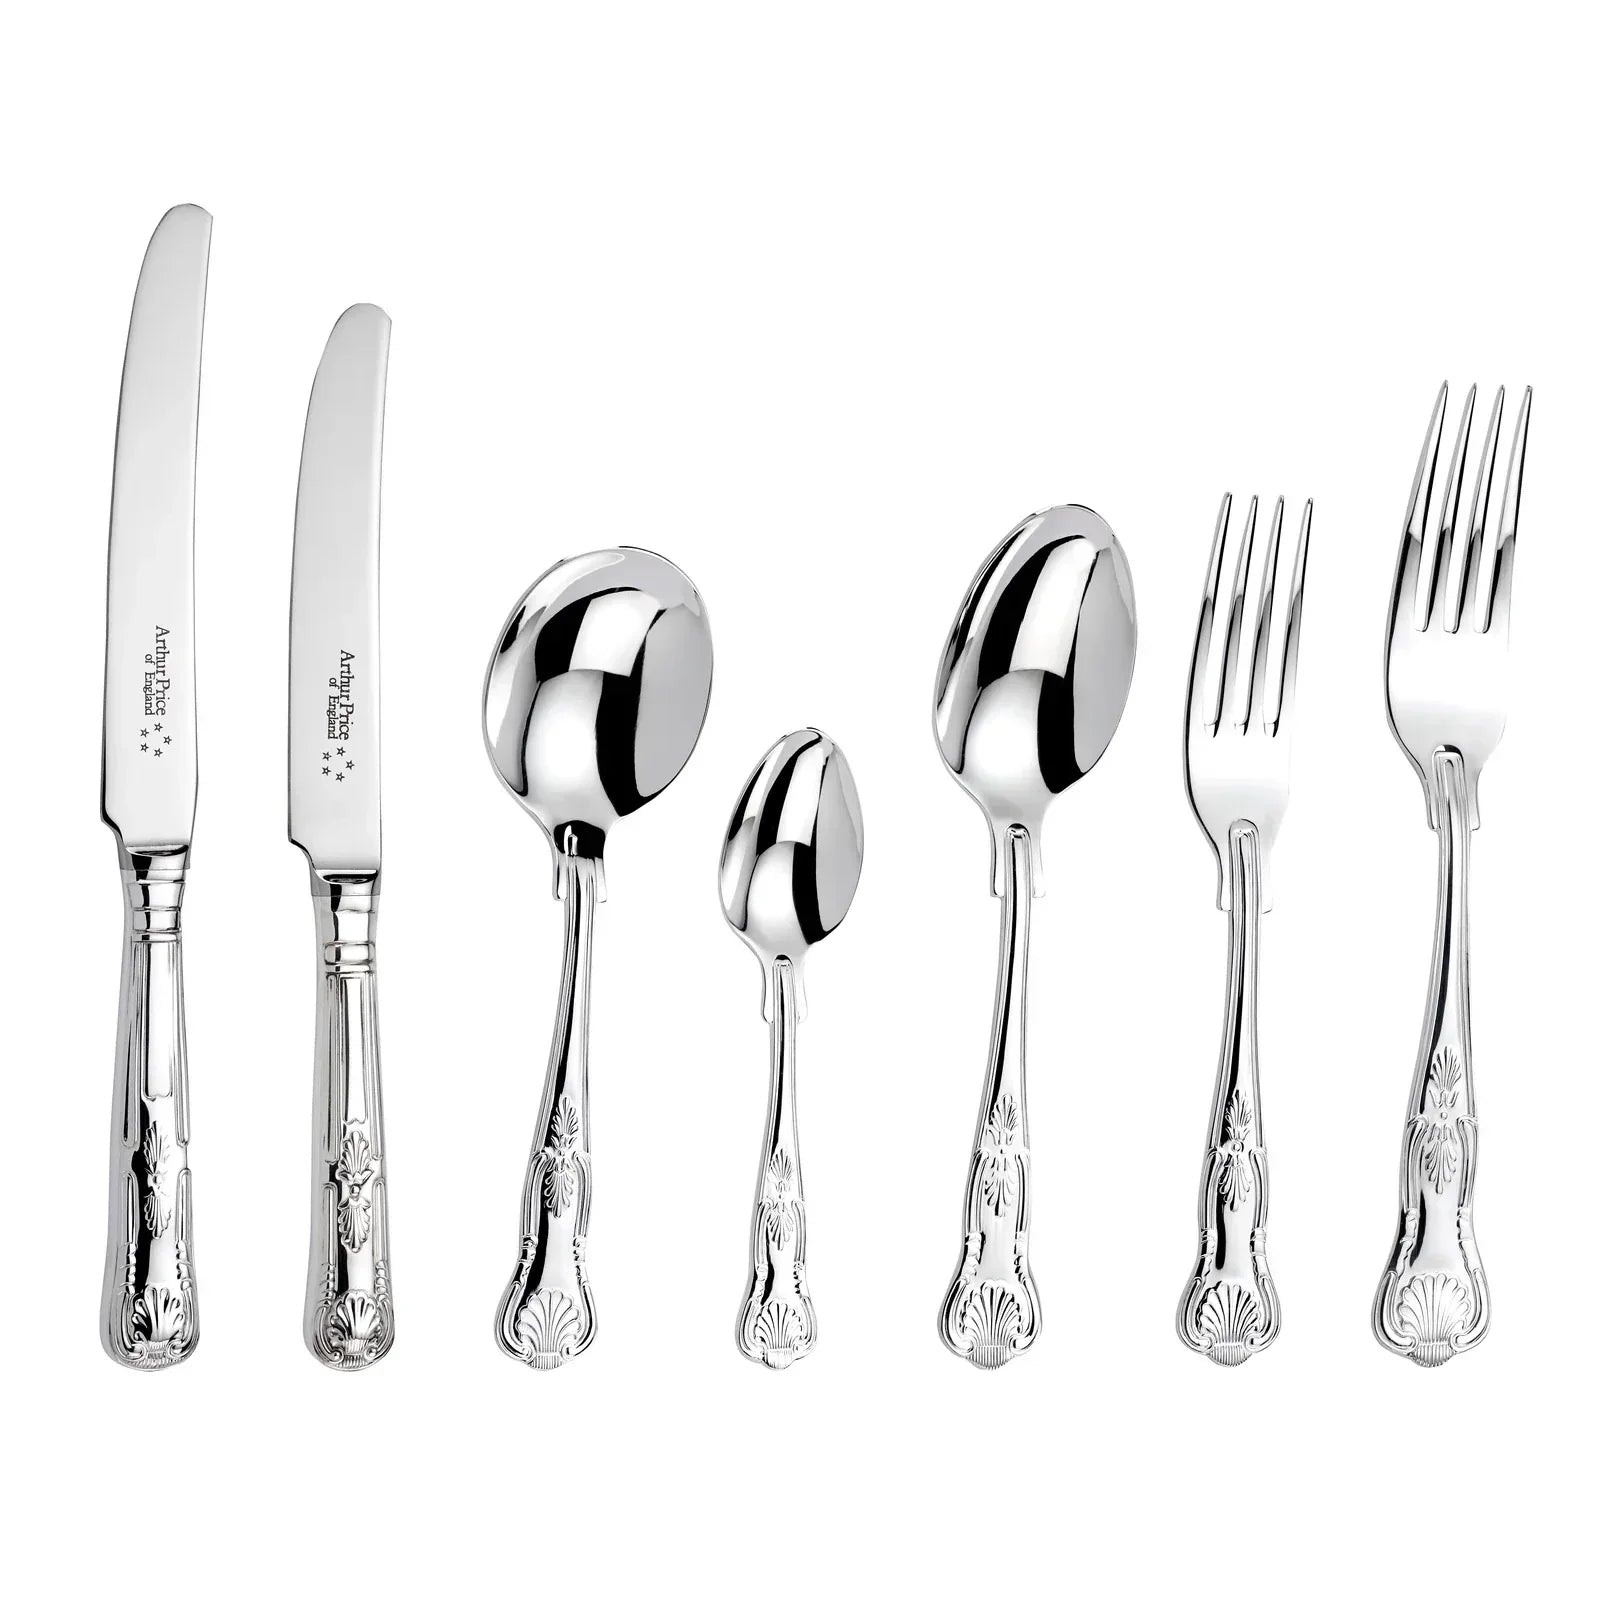 Arthur Price Sovereign Stainless Steel Kings 46 Piece Canteen